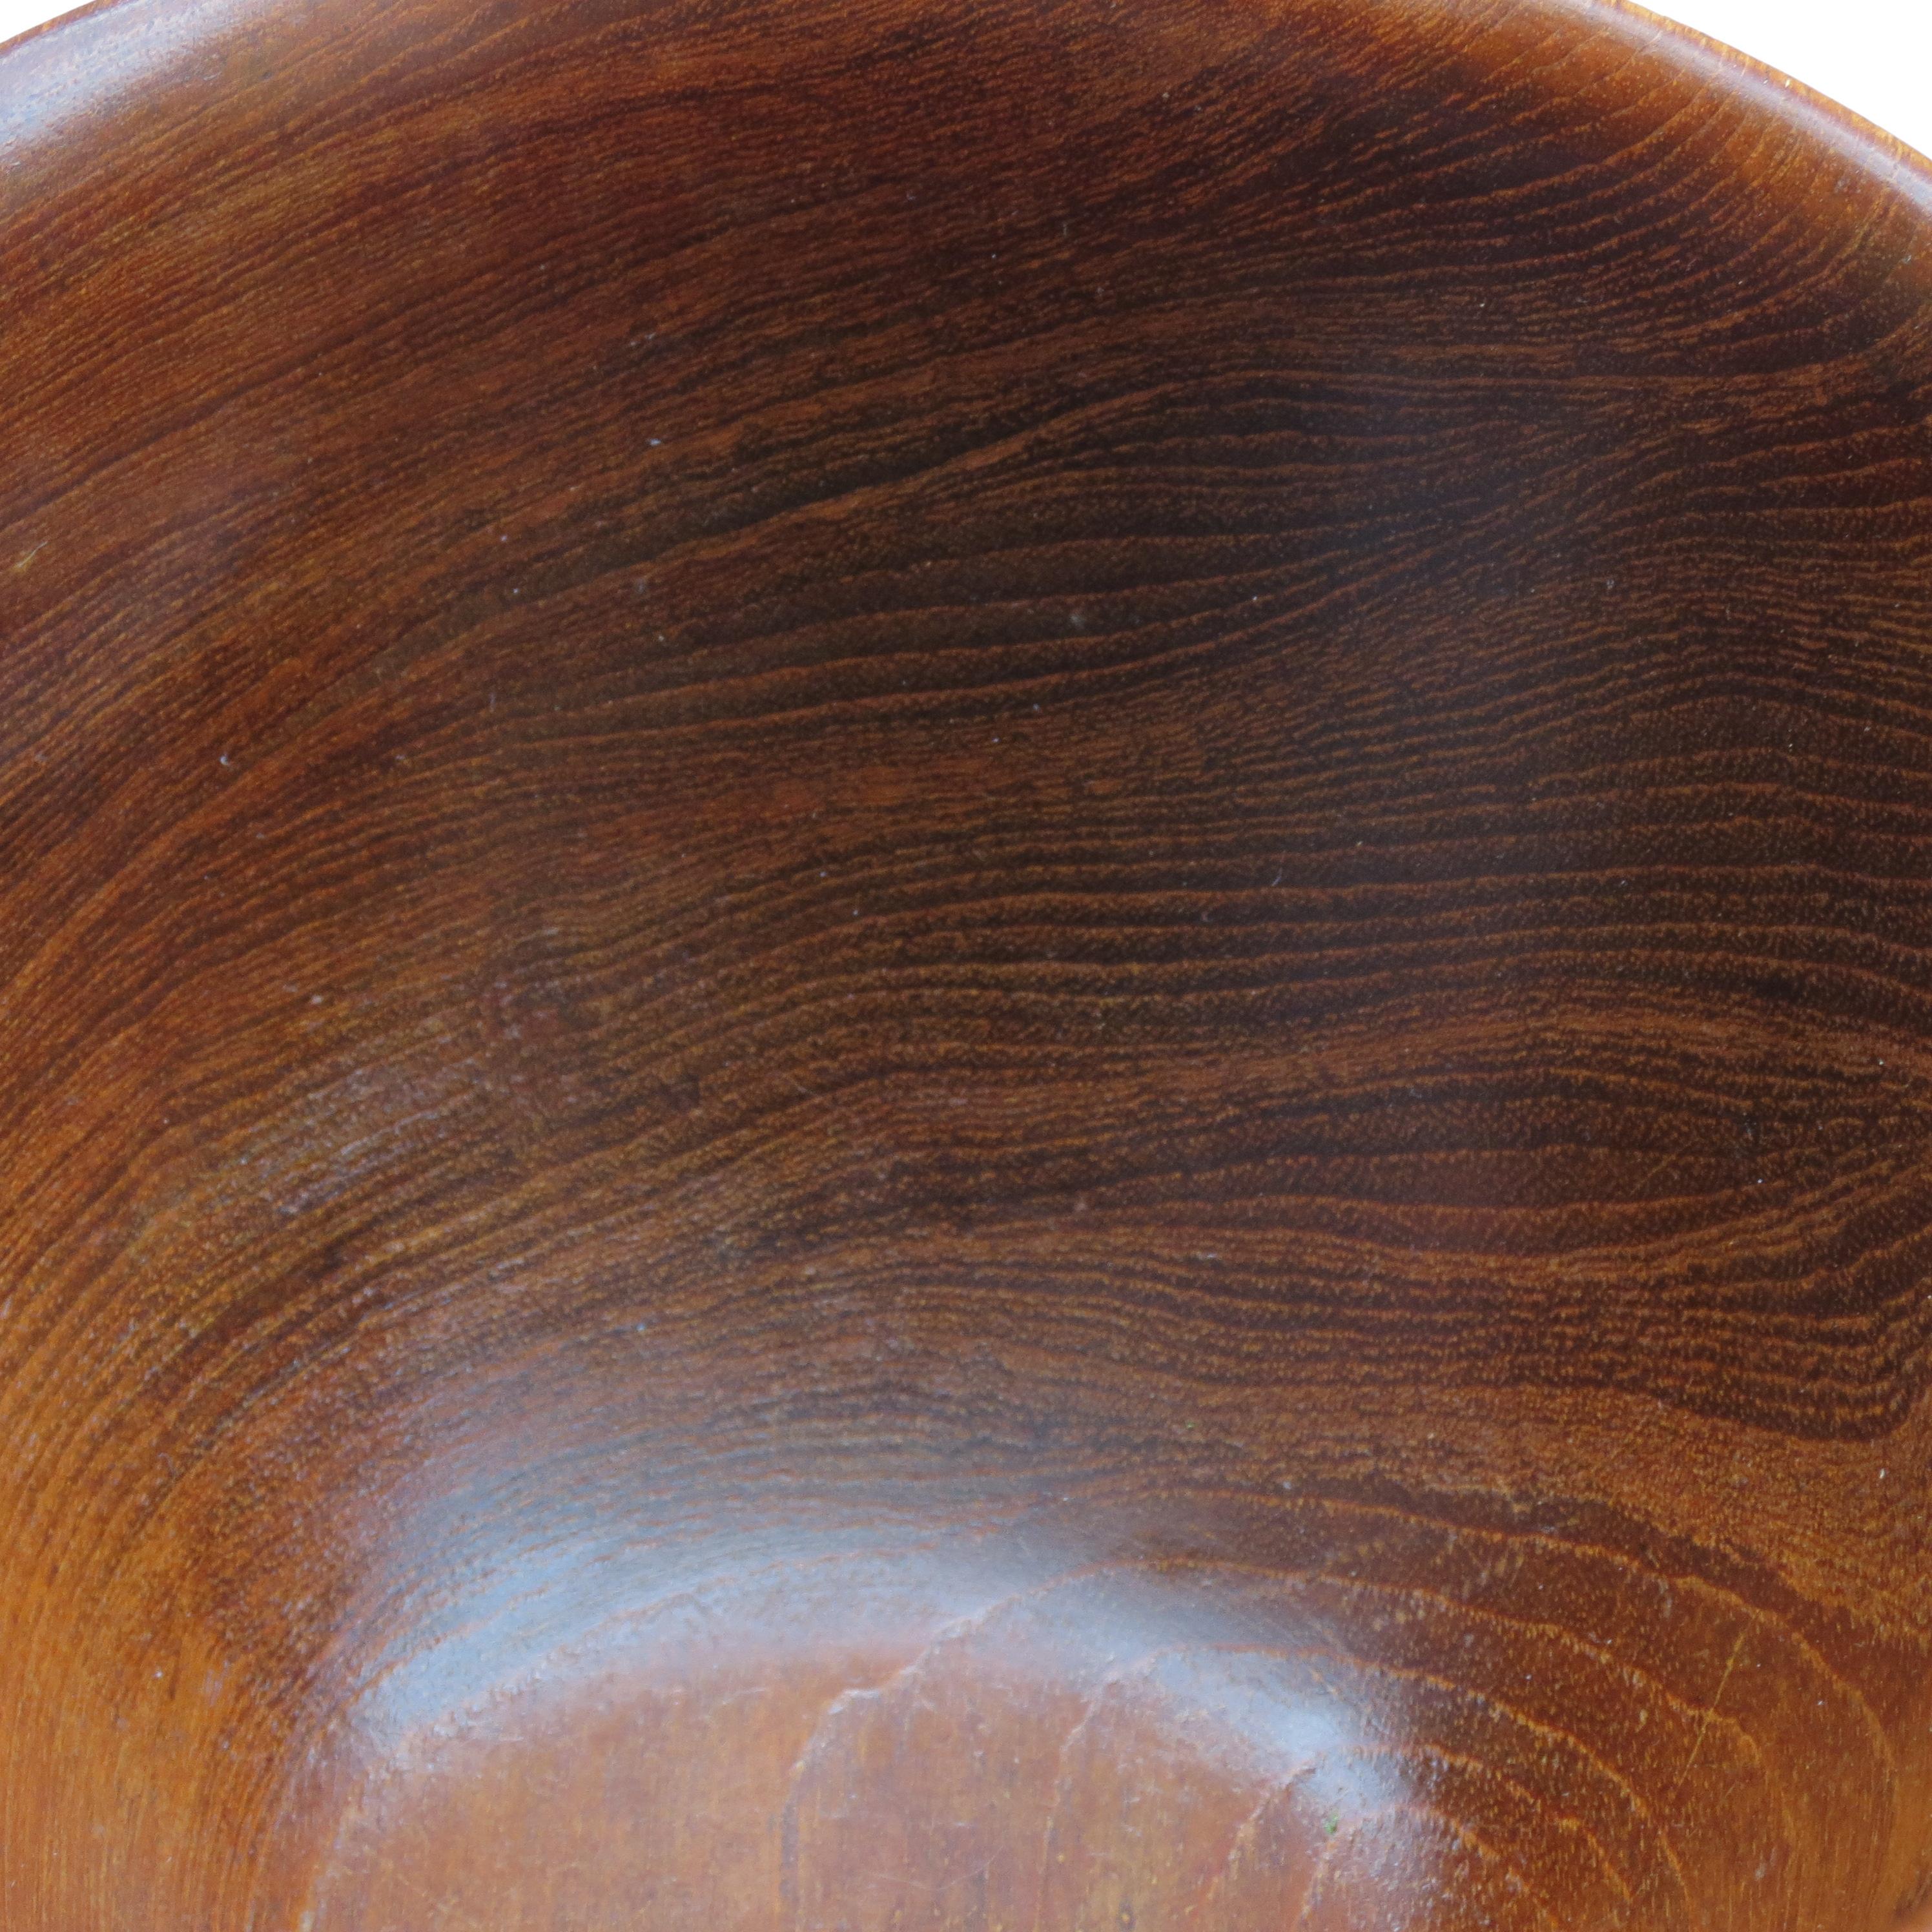 Hand-Crafted Large Teak Wooden Bowl by Galatix, England, 1970s